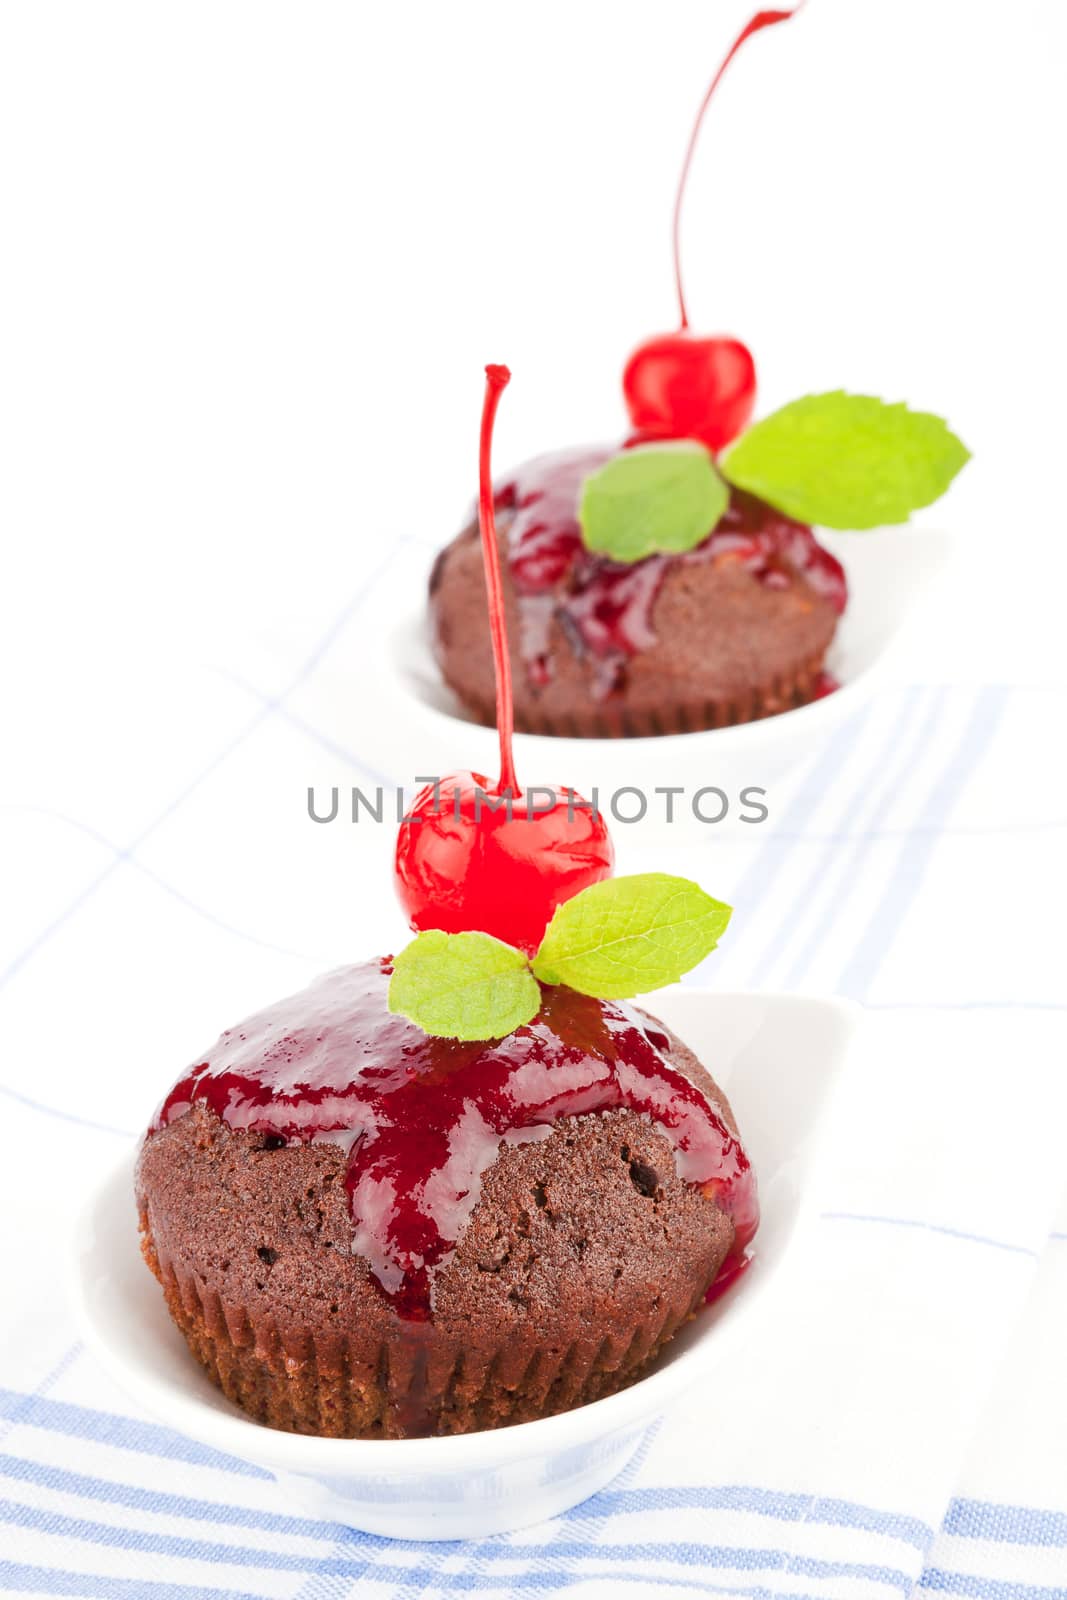 Delicious chocolate muffins decorated with jam, cherry and fresh mint leaf on kitchen cloth. Sweet culinary food.